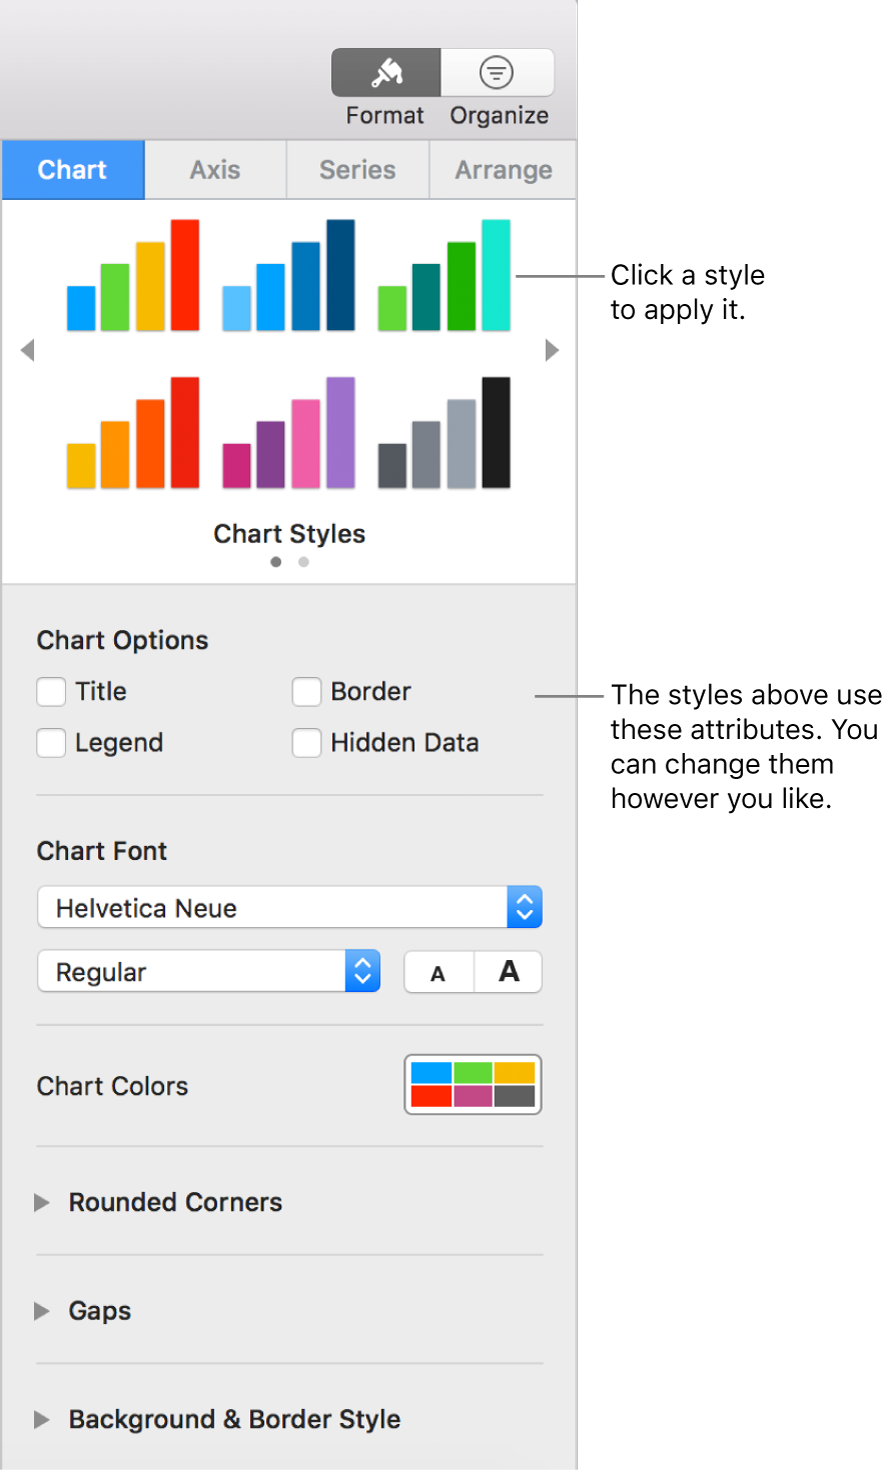 The Formatting sidebar showing the controls for formatting charts.